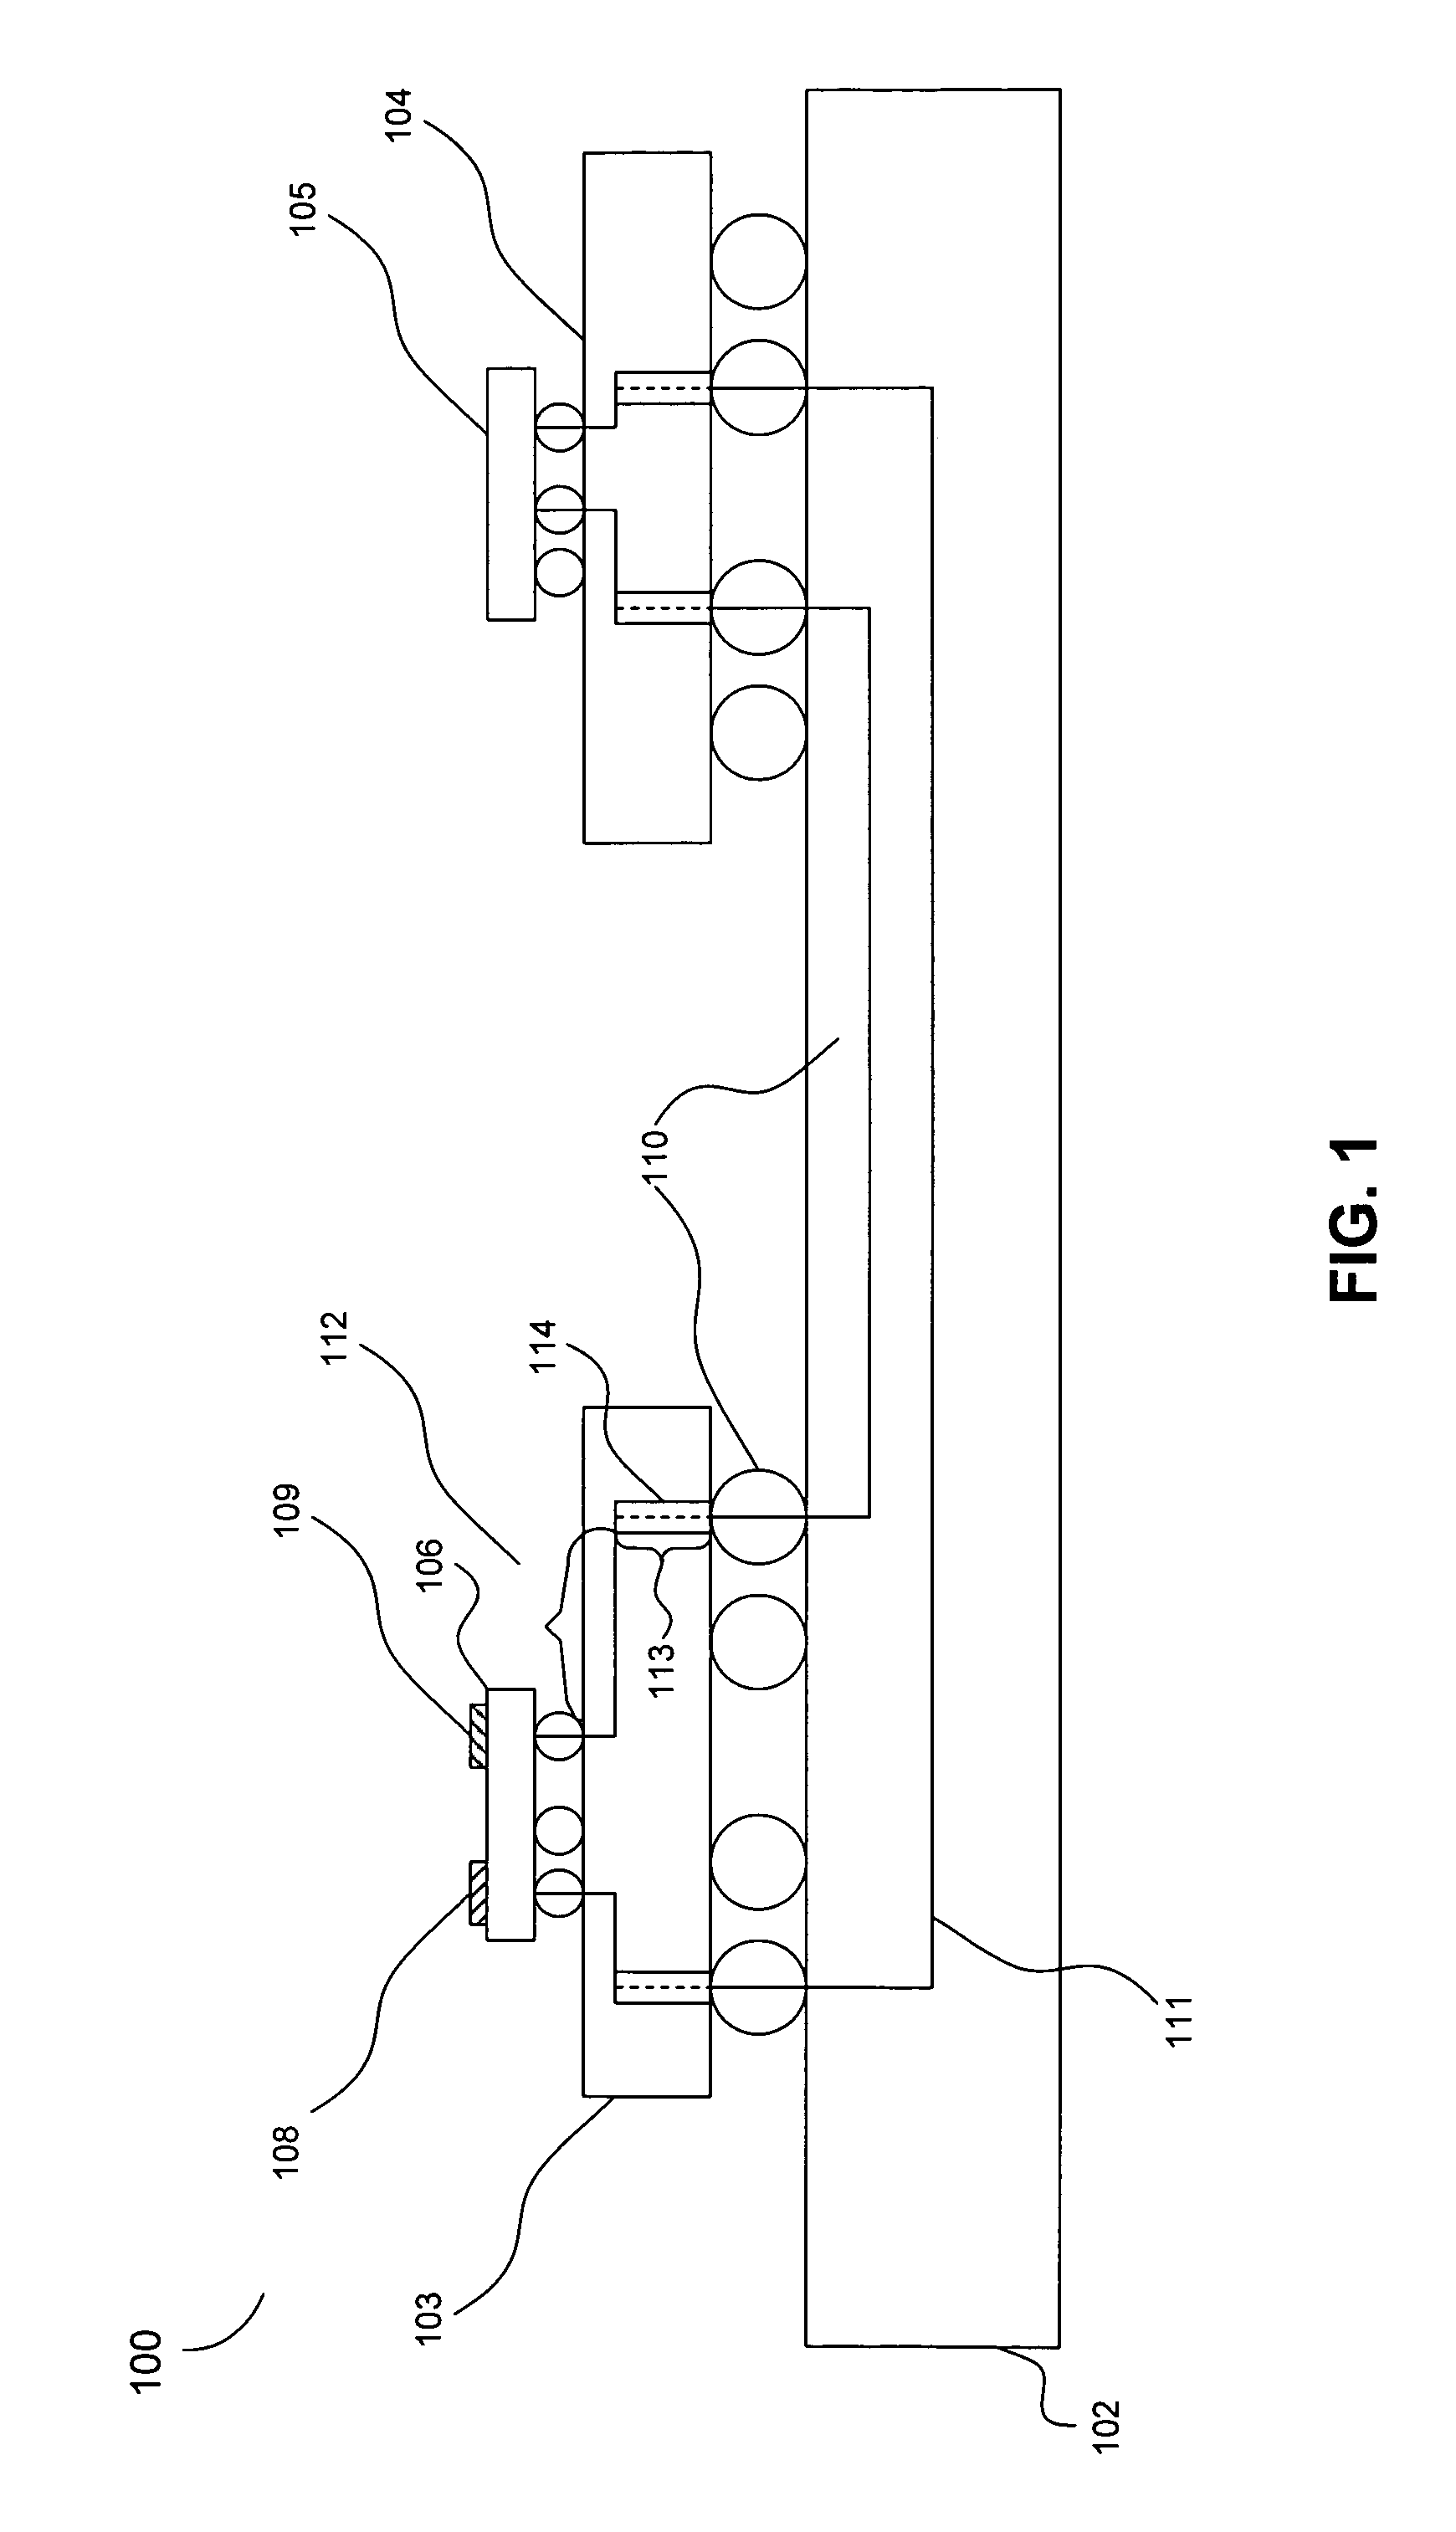 High data rate differential signal line design for uniform characteristic impedance for high performance integrated circuit packages